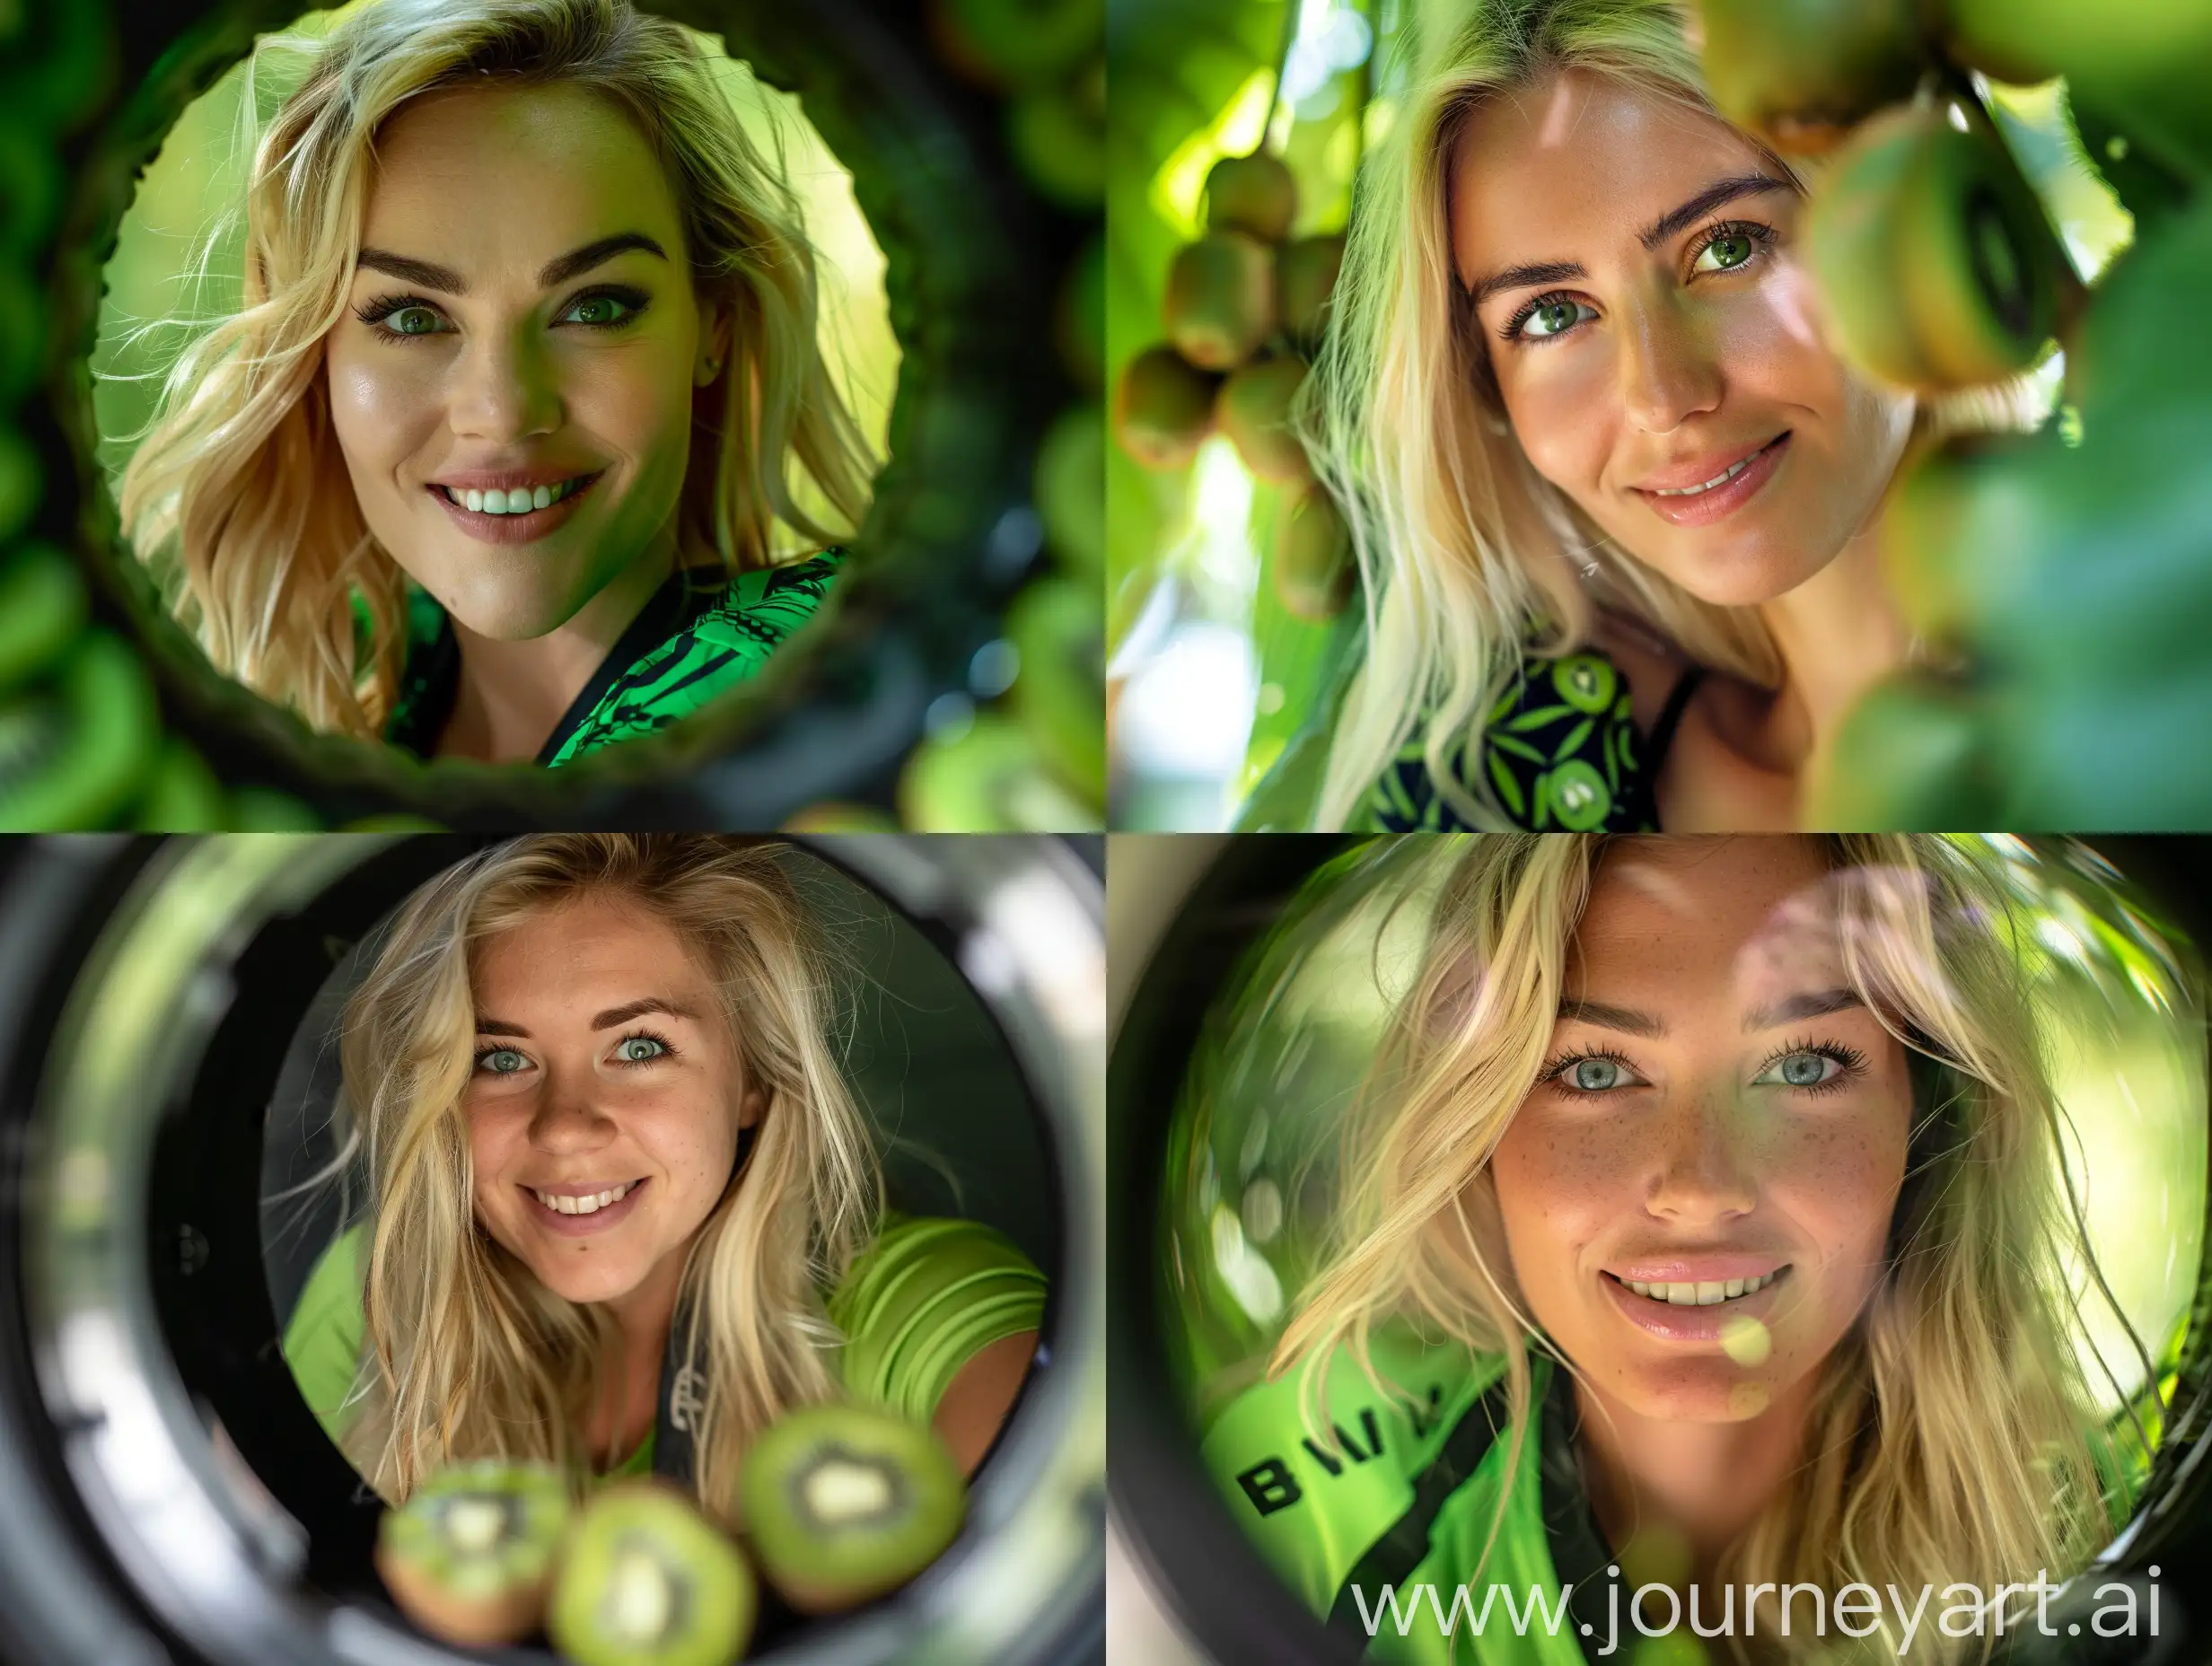 Blonde-Woman-with-Kiwis-Happy-Face-in-Green-and-Black-Clothes